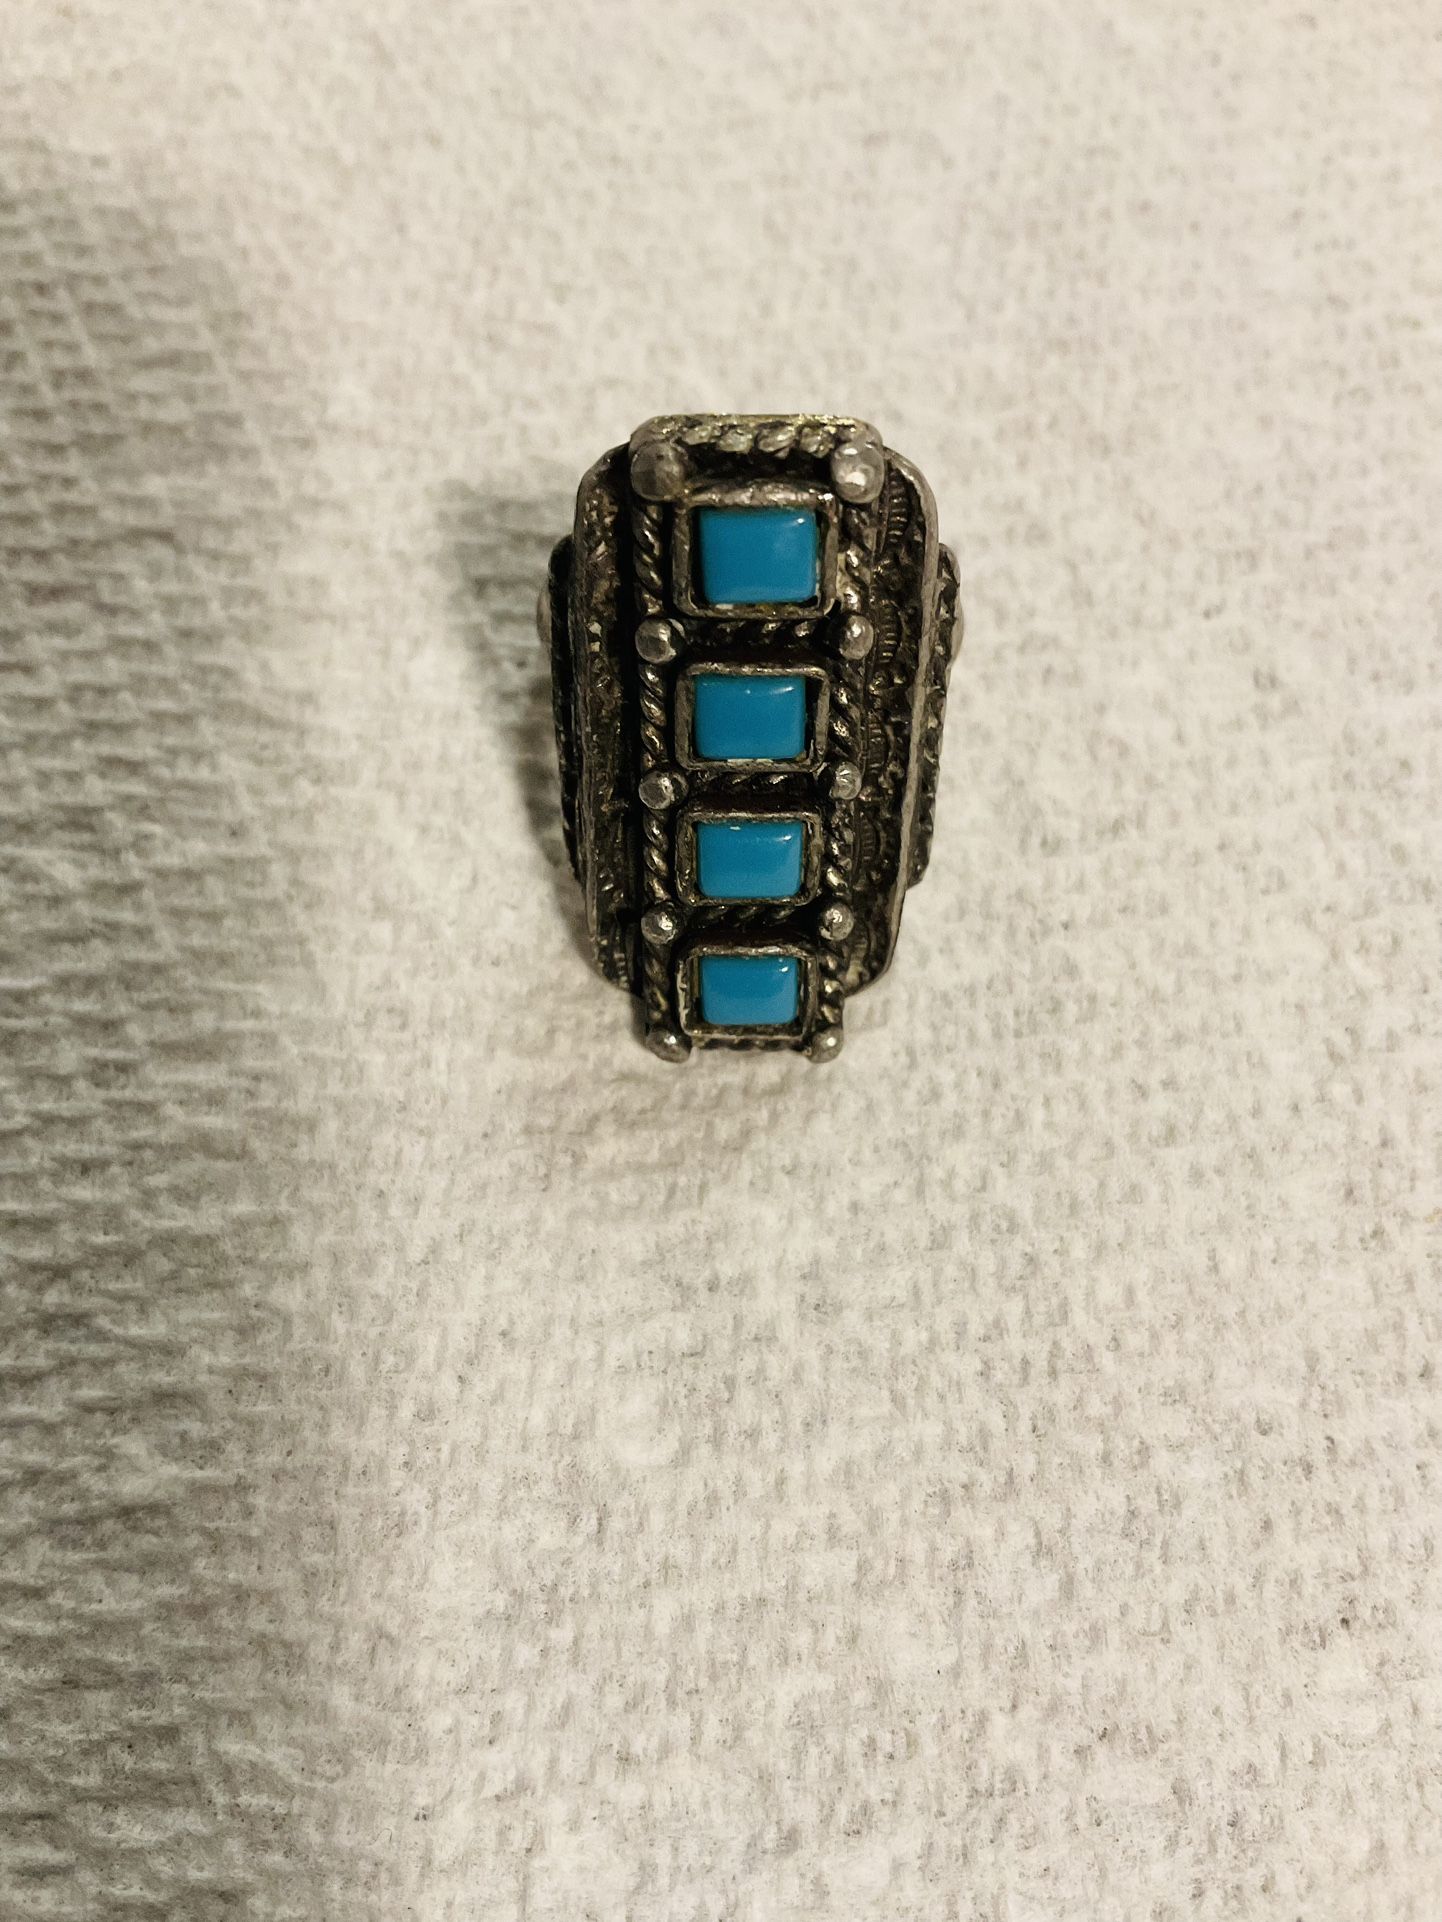 FLORENTA 1970s FAUX TURQUOISE RING - ADJUSTABLE - $10 Not Silver